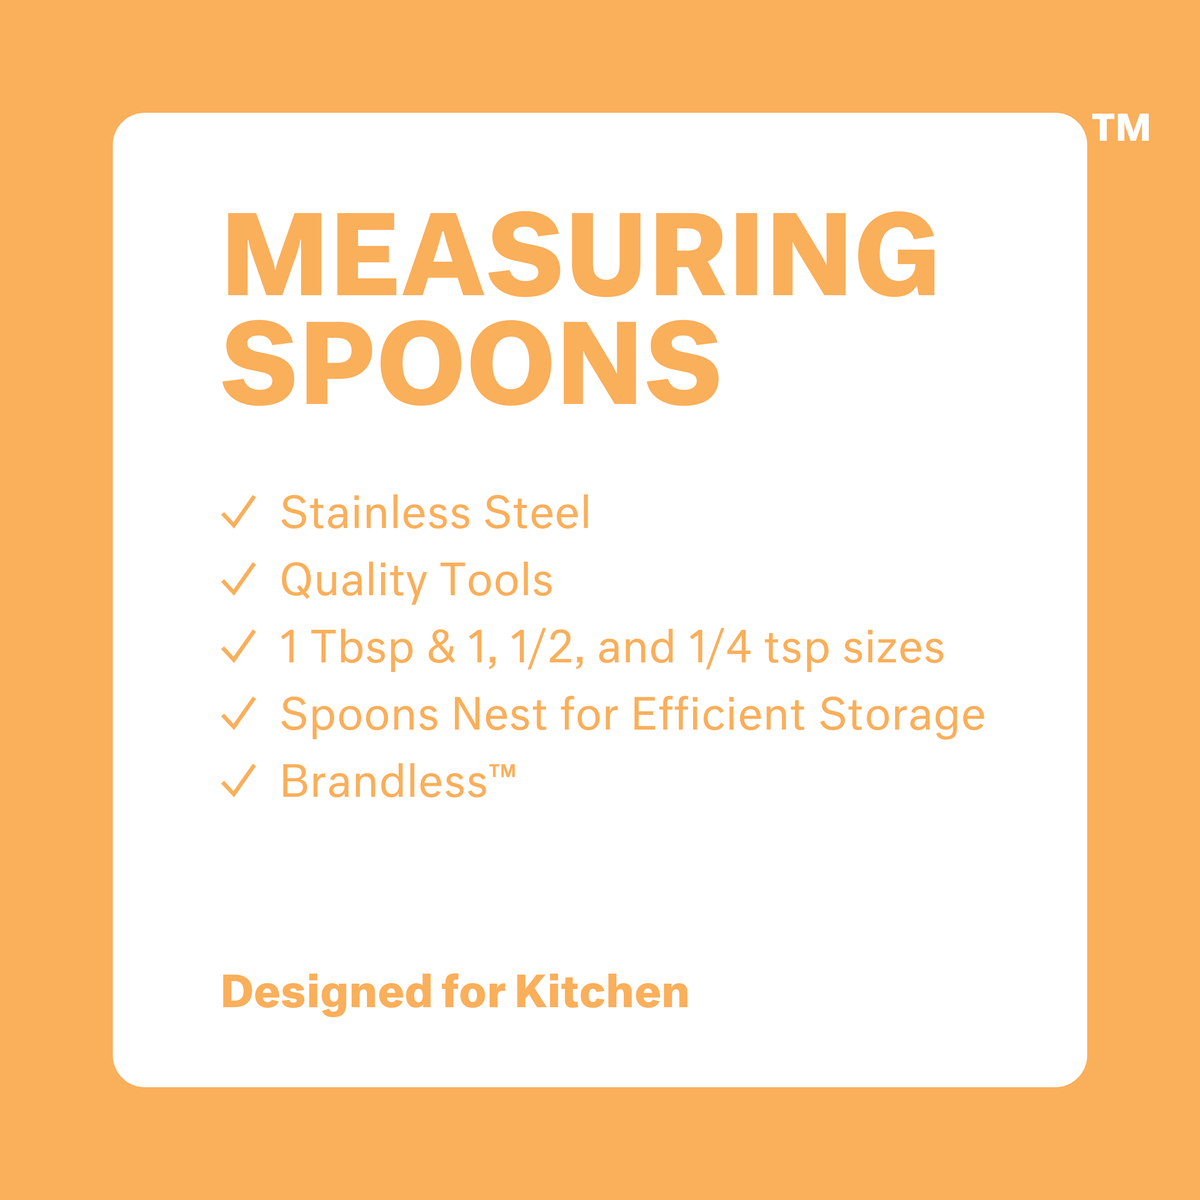 Measuring Spoons: stainless steel, quality tools, 1 Tbsp, 1tsp, 1/2tsp, and 1/4tsp sizes. Spoons nest for efficient storage. Brandless. Designed for kitchen.